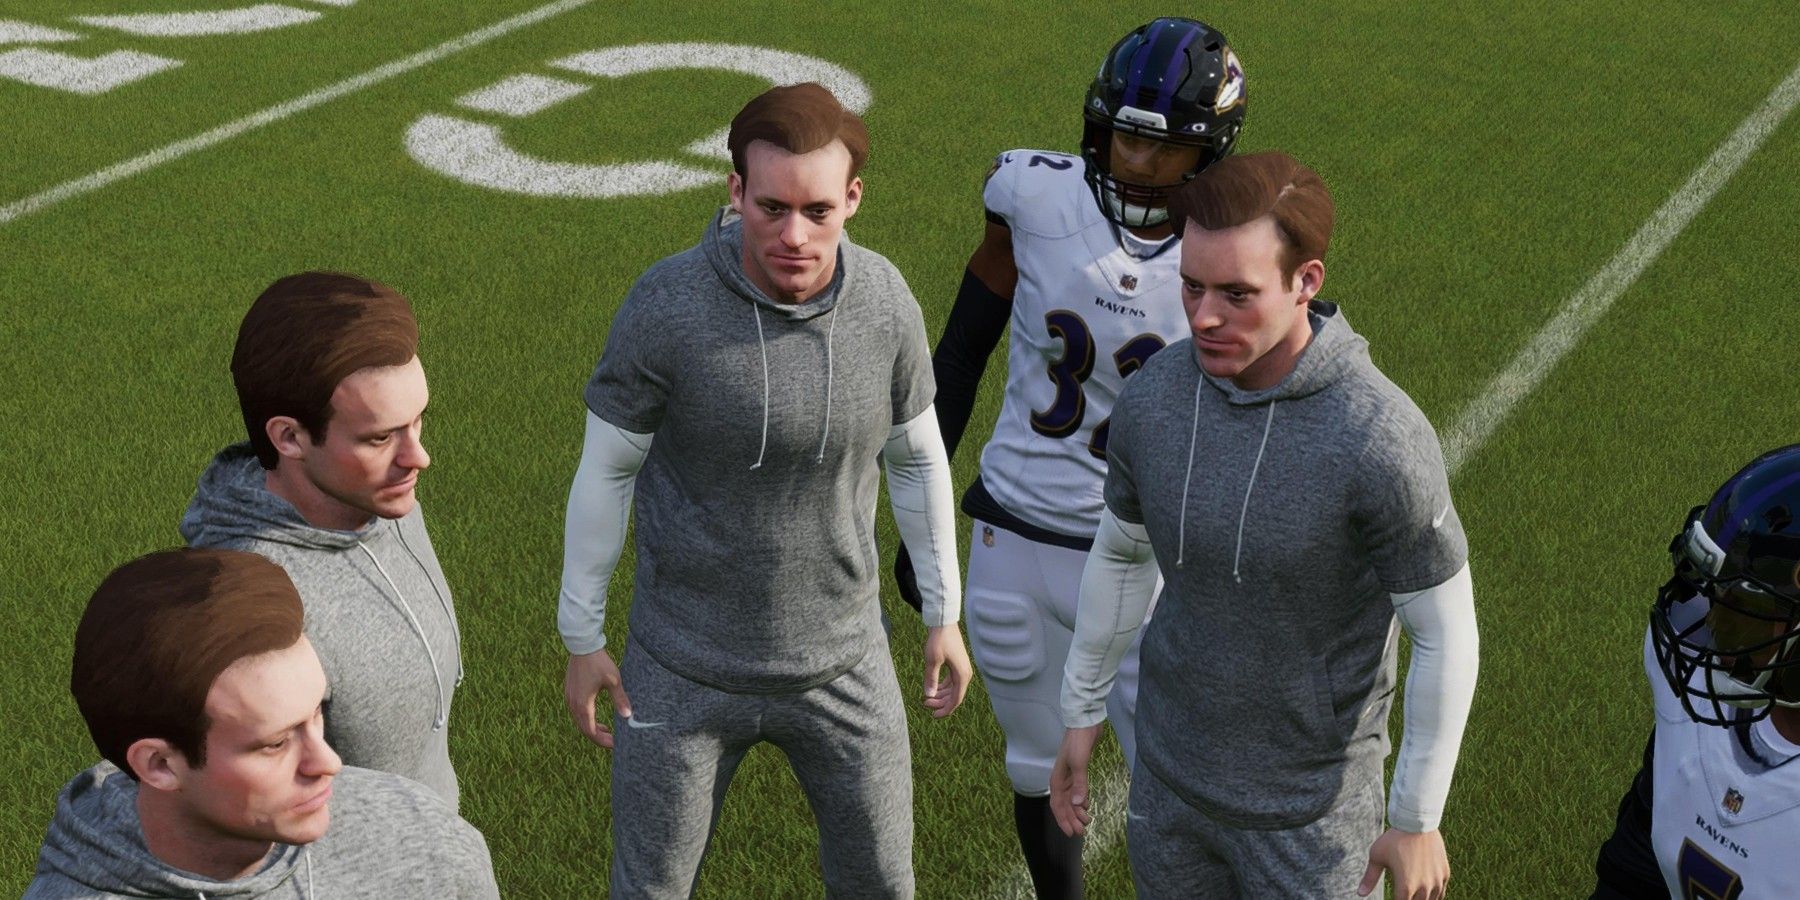 Madden Football Tips, Cheats, Glitches & Strategy Guide